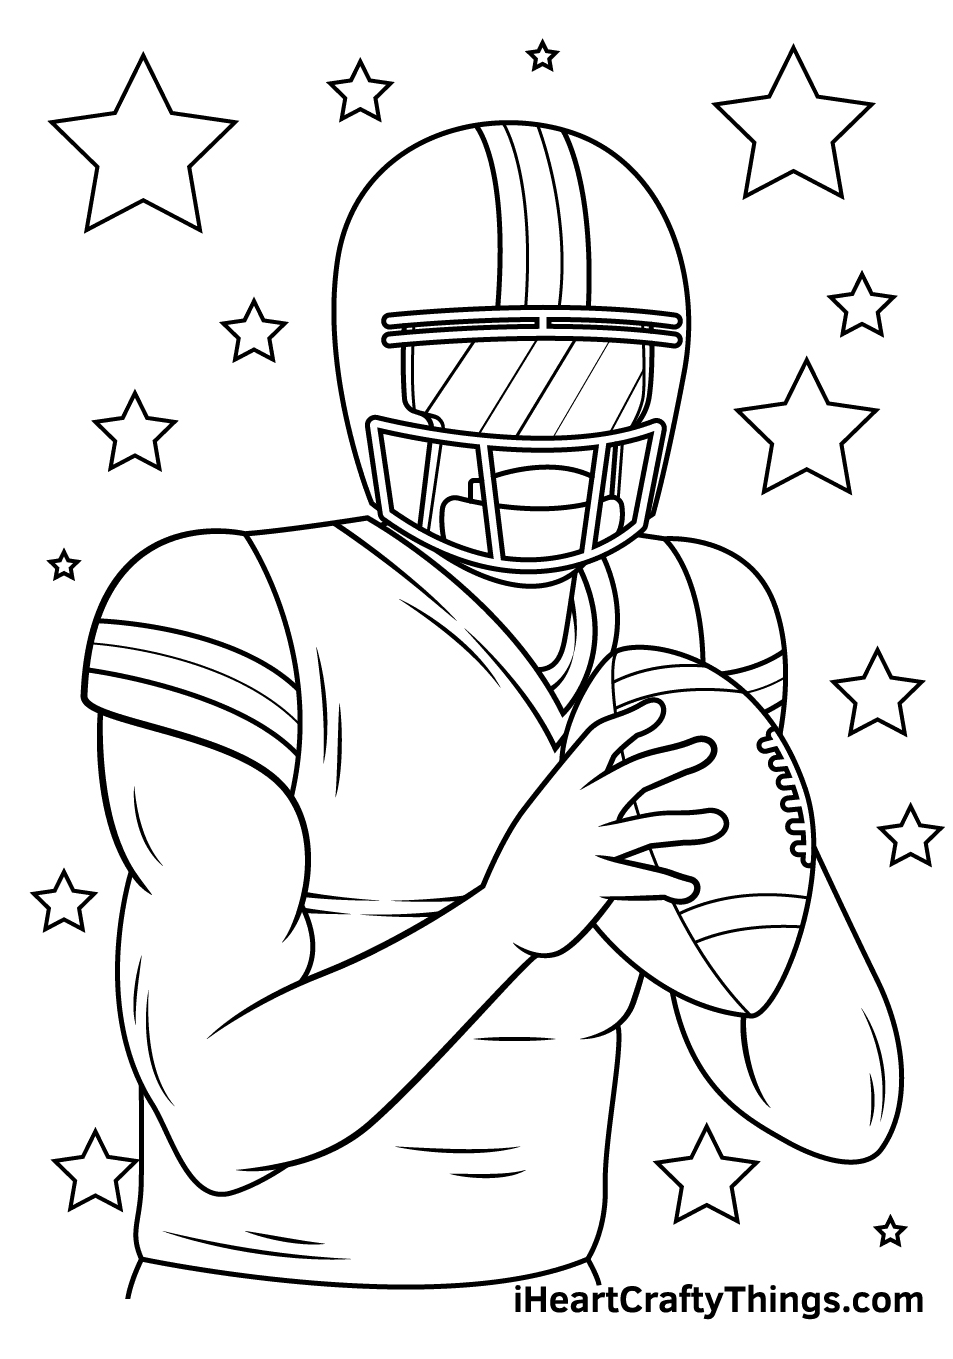 A Football Player holding the Ball Coloring Pages